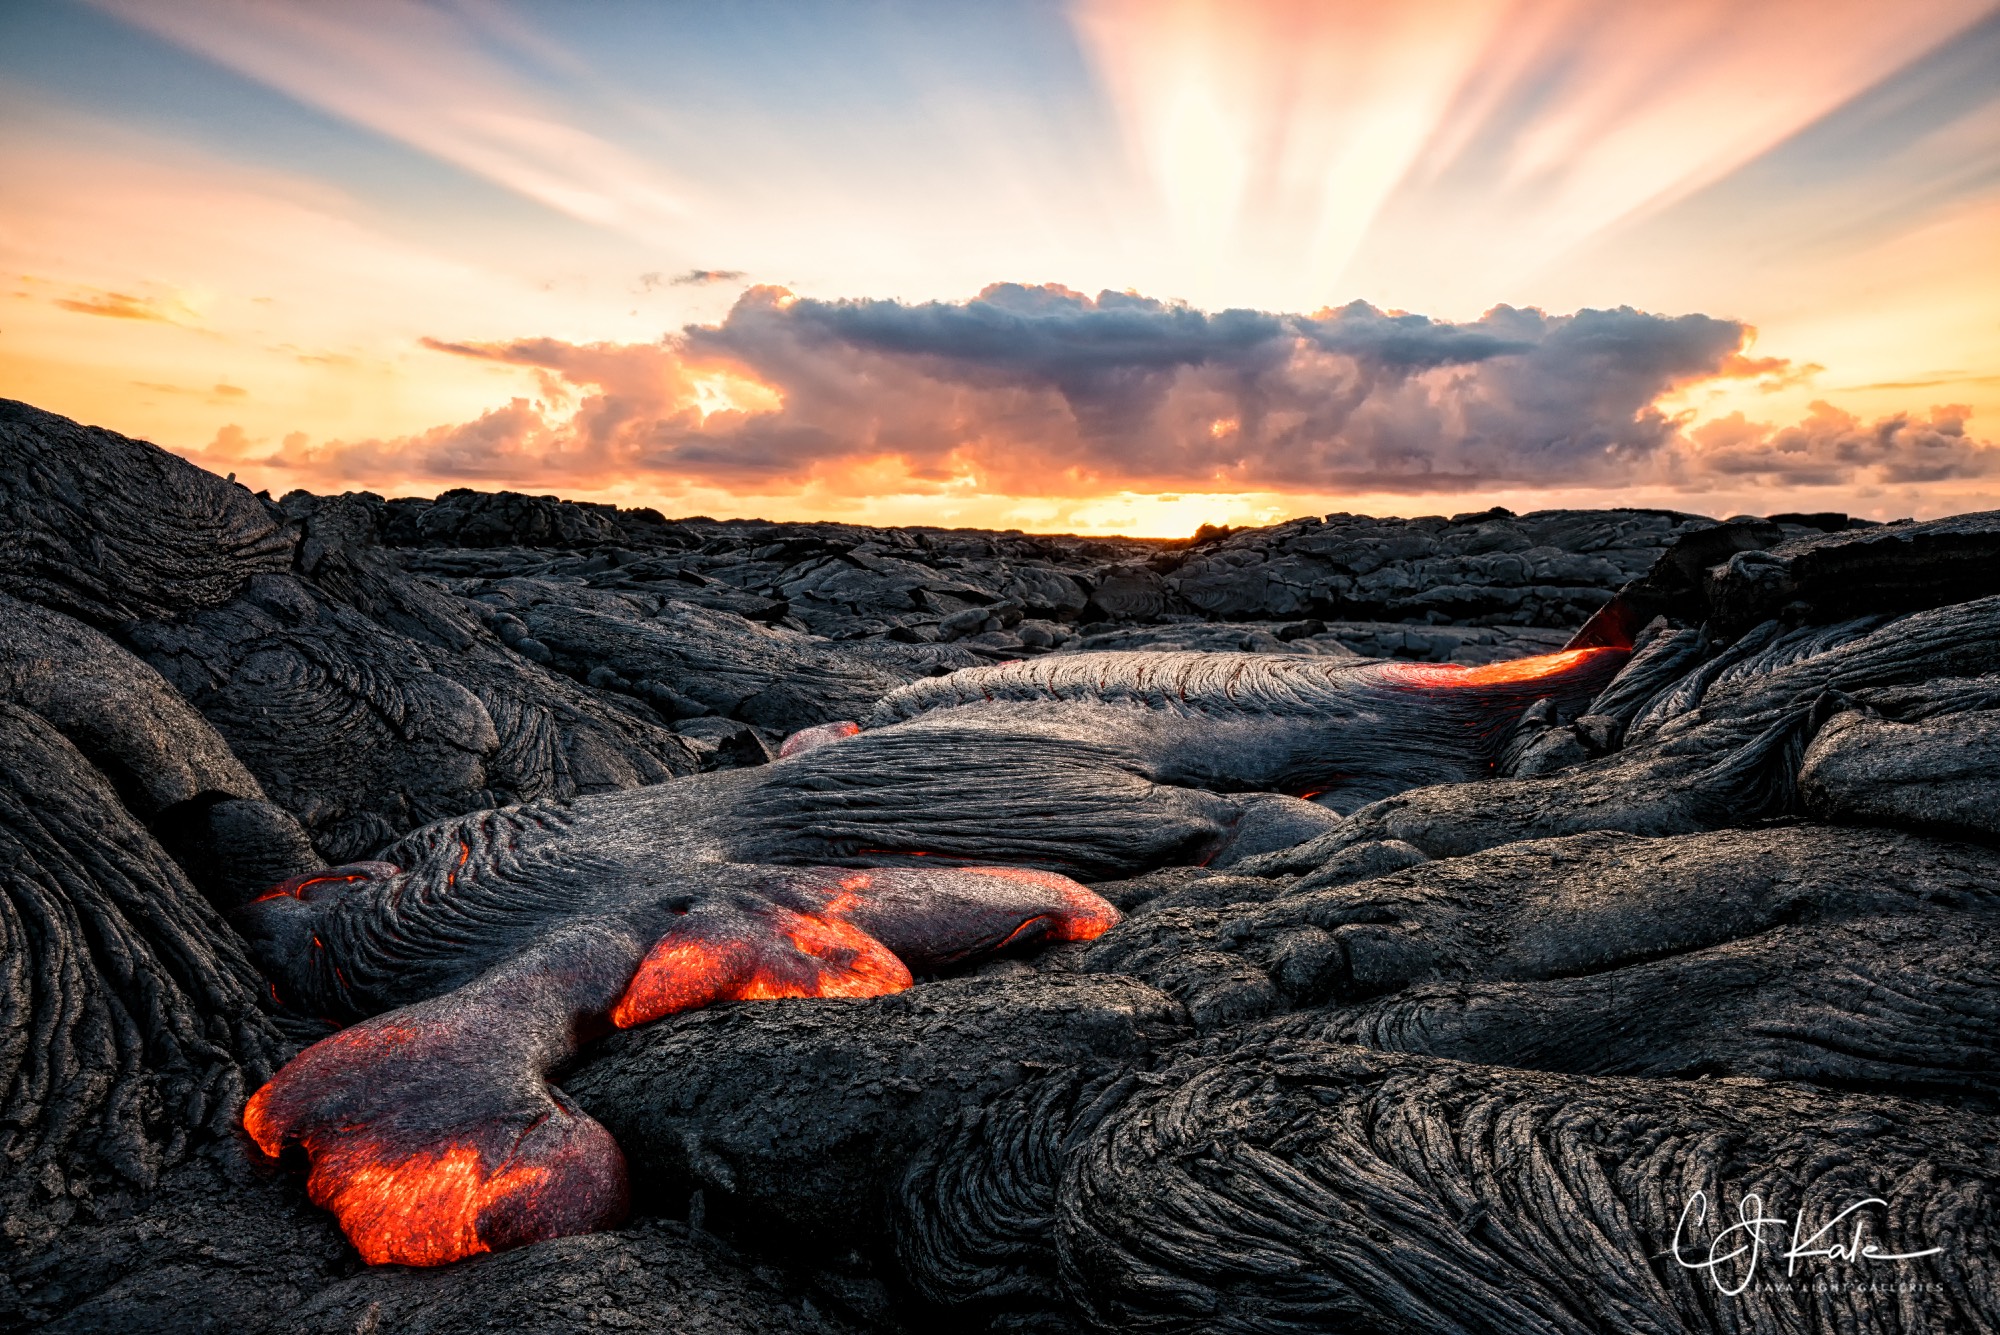 Found a lava breakout just as the sun was directly behind some early morning clouds.